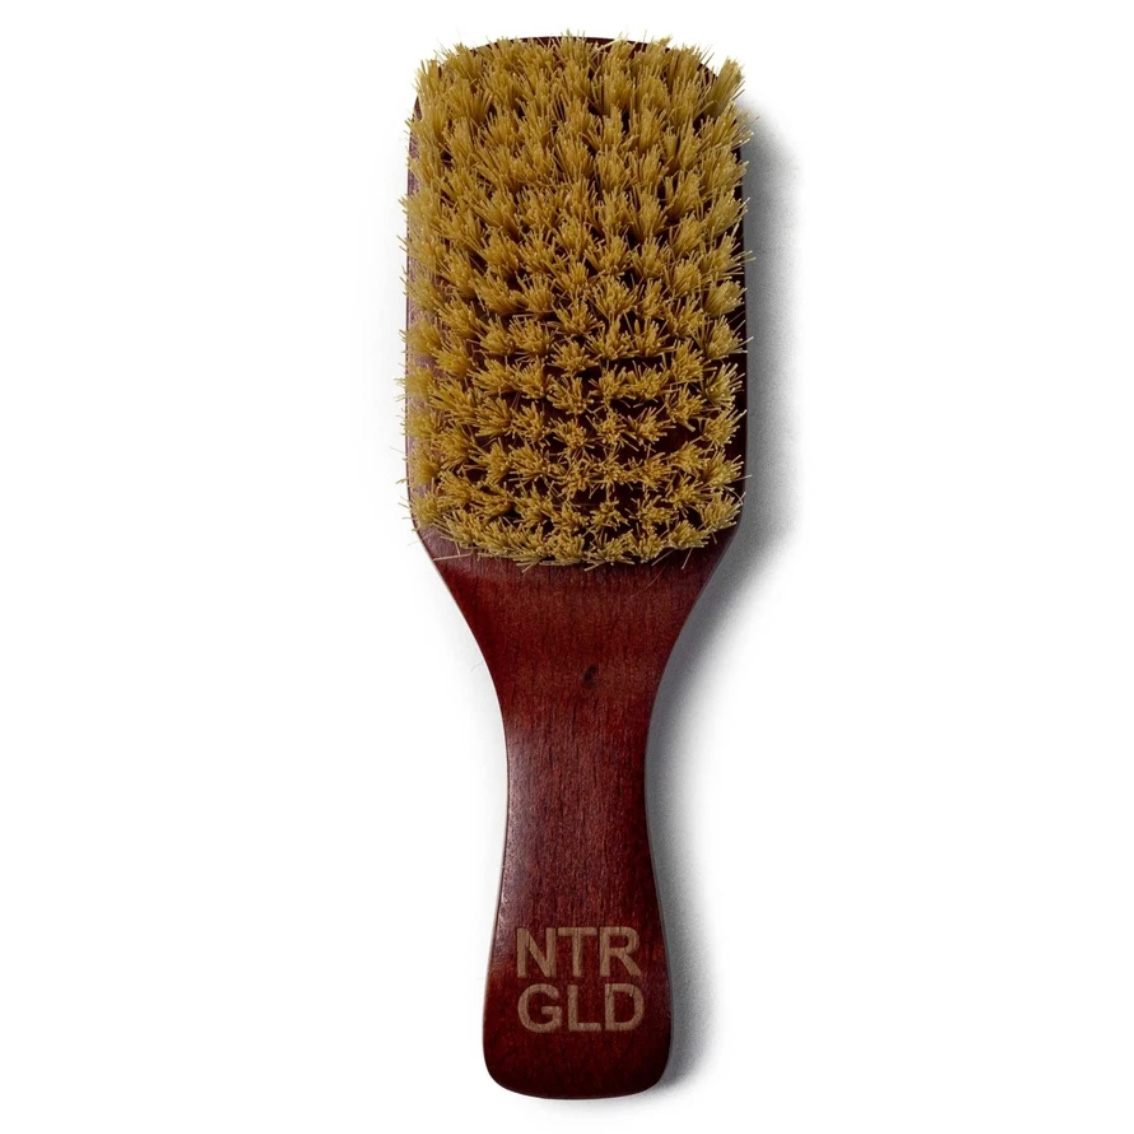 sustainable natural hair brands brush neter gold